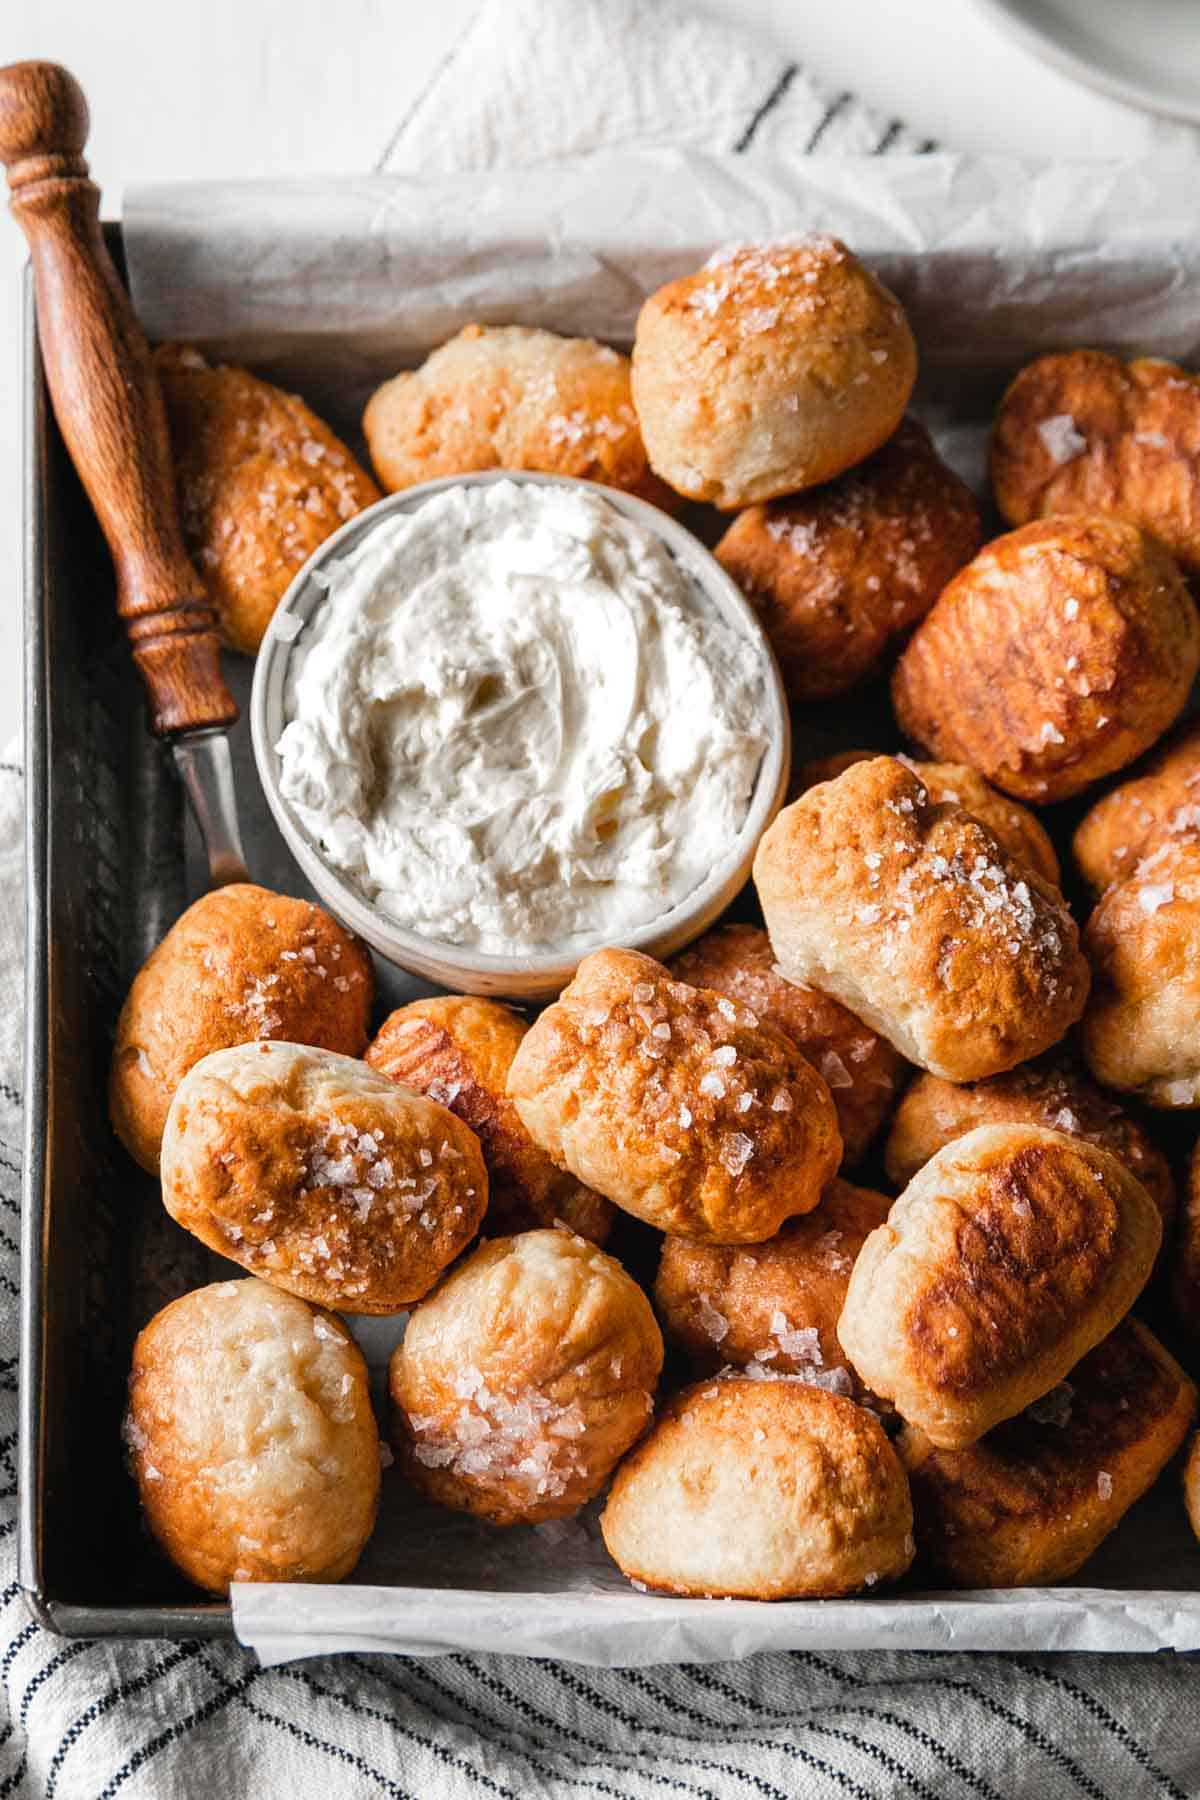 A tray full of gluten-free pretzel bites with a small bowl of cream cheese.